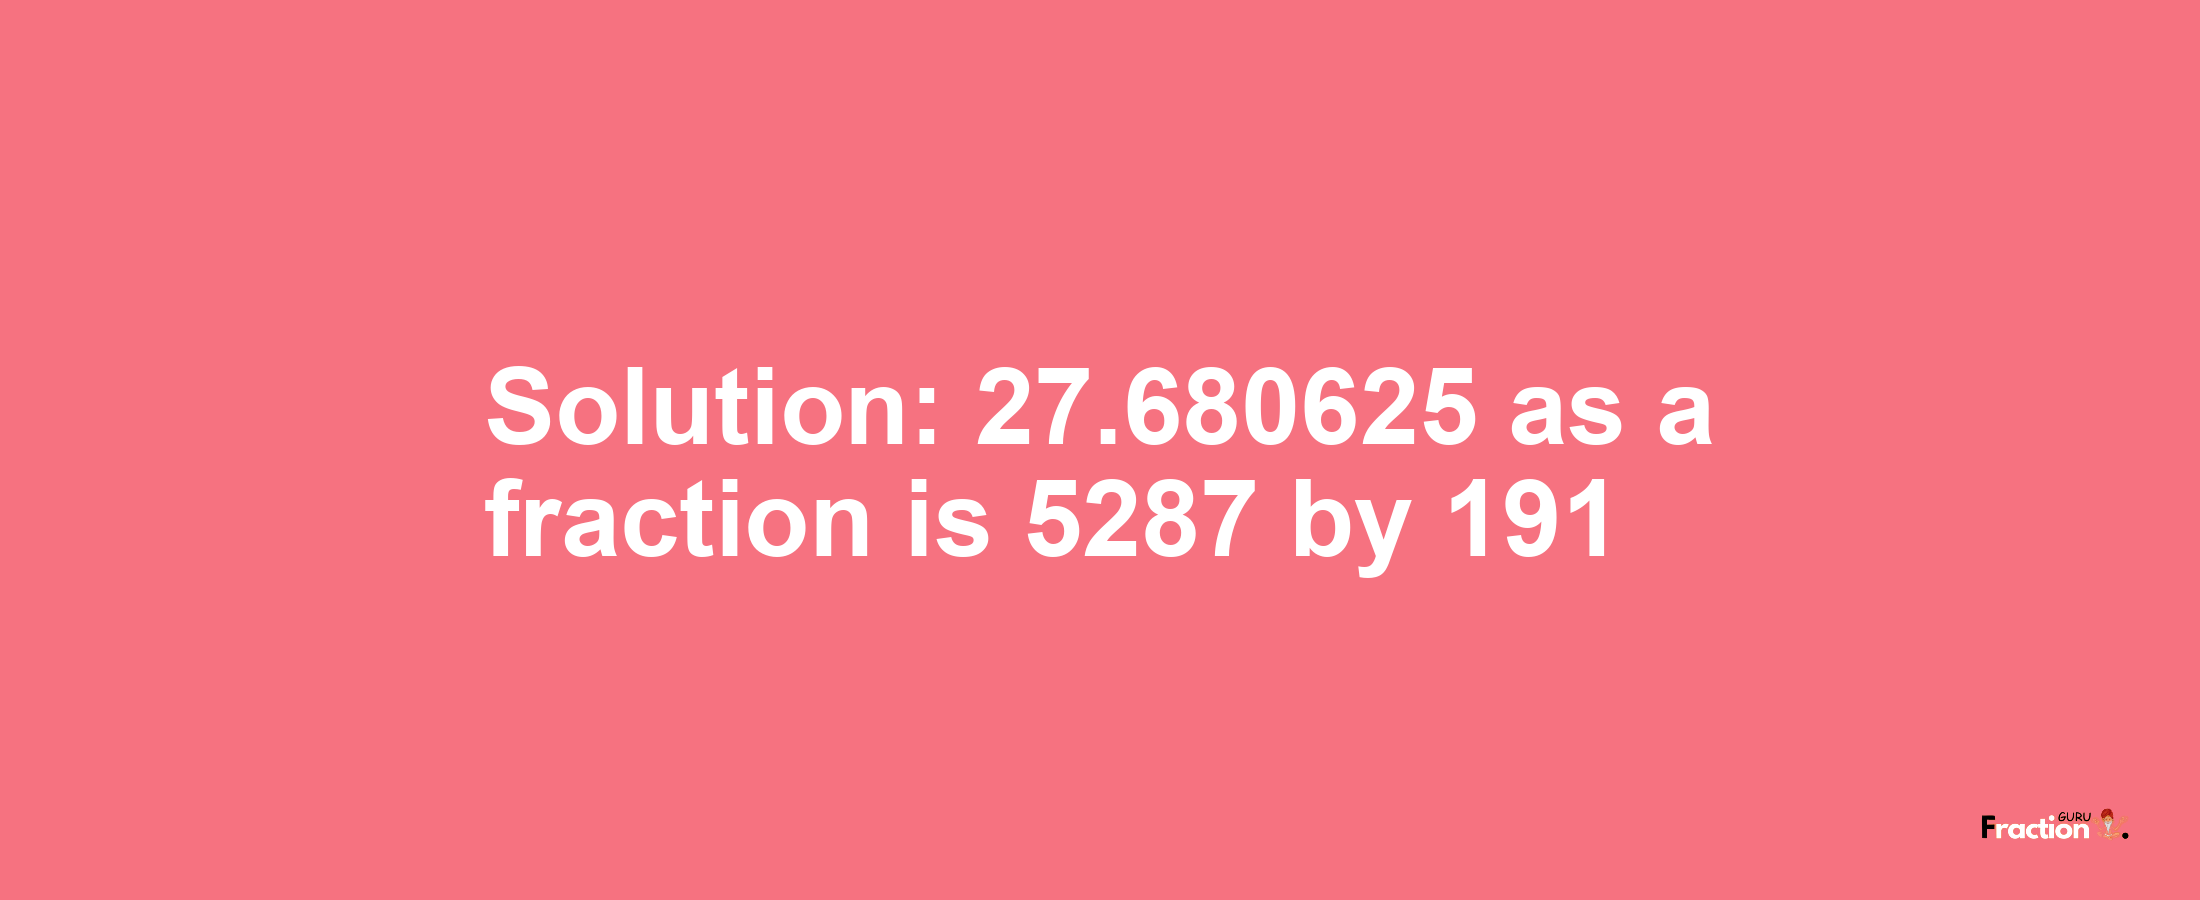 Solution:27.680625 as a fraction is 5287/191